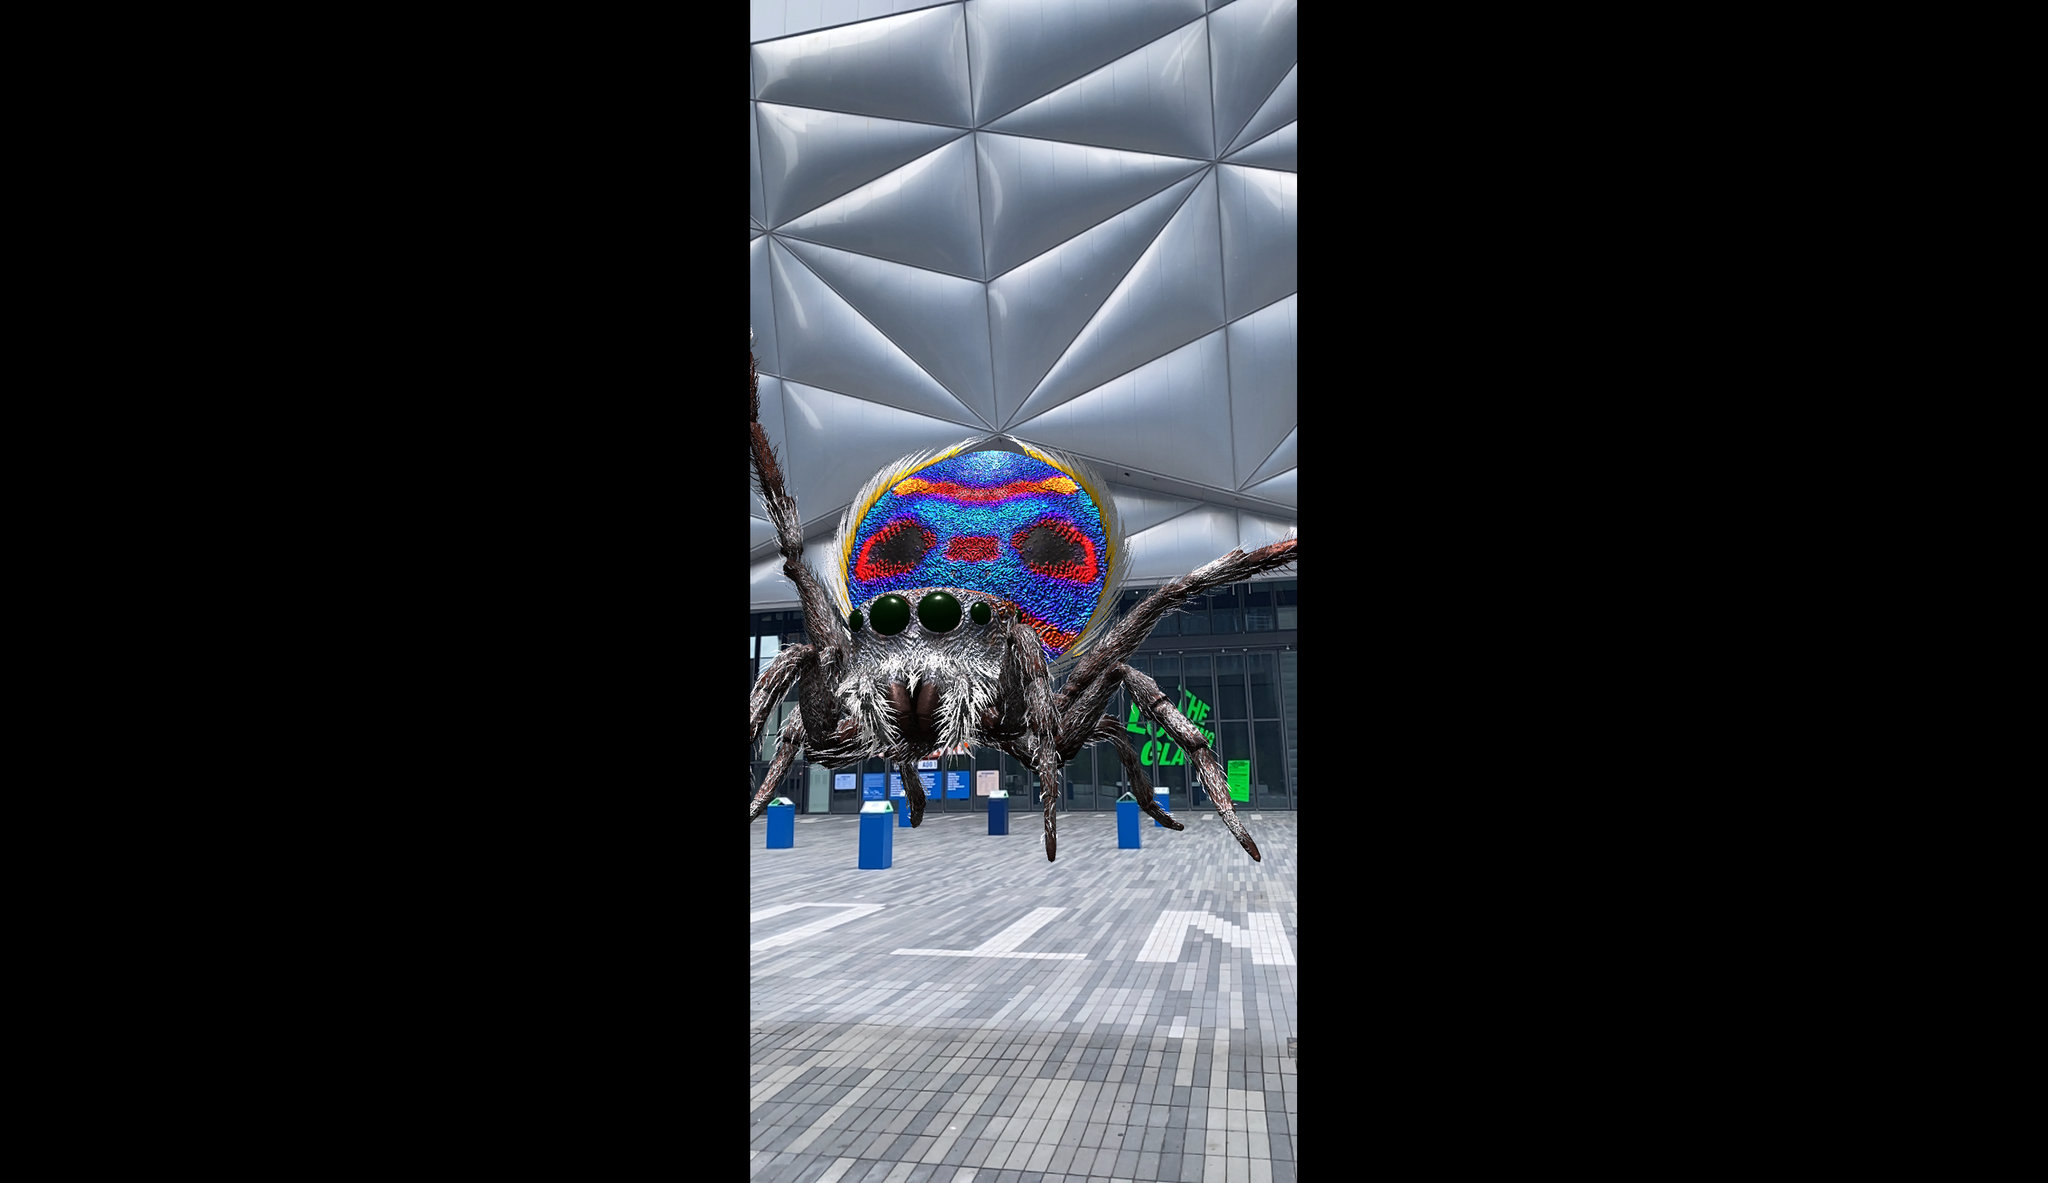 A giant AR spider with a flat purple-and-red-patterned body stands in front of The Shed